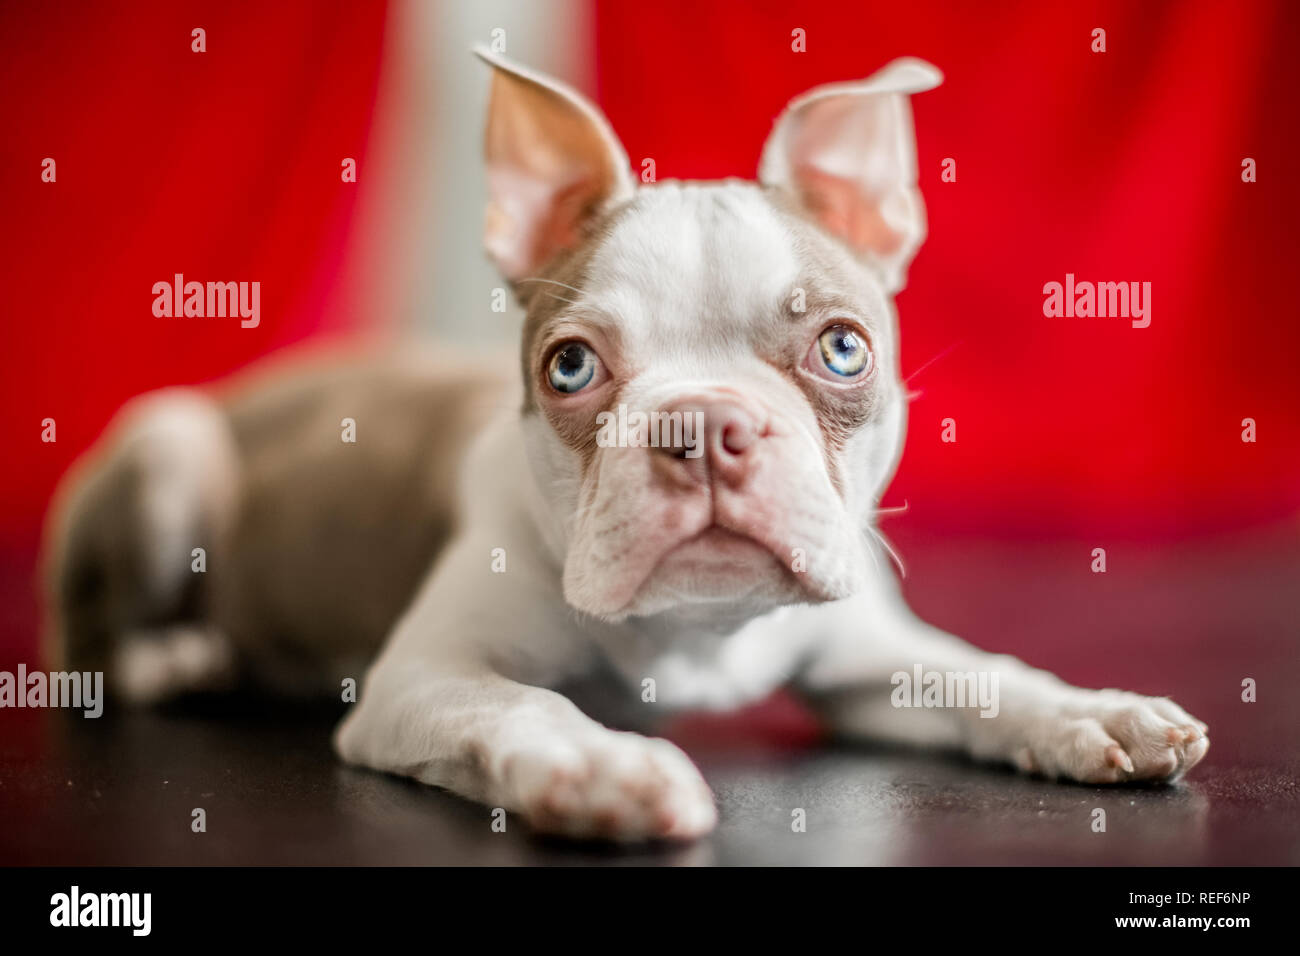 close up A Boston terrier ready to pounce on a black shiny floor with a red curtain background looking at the camera Stock Photo